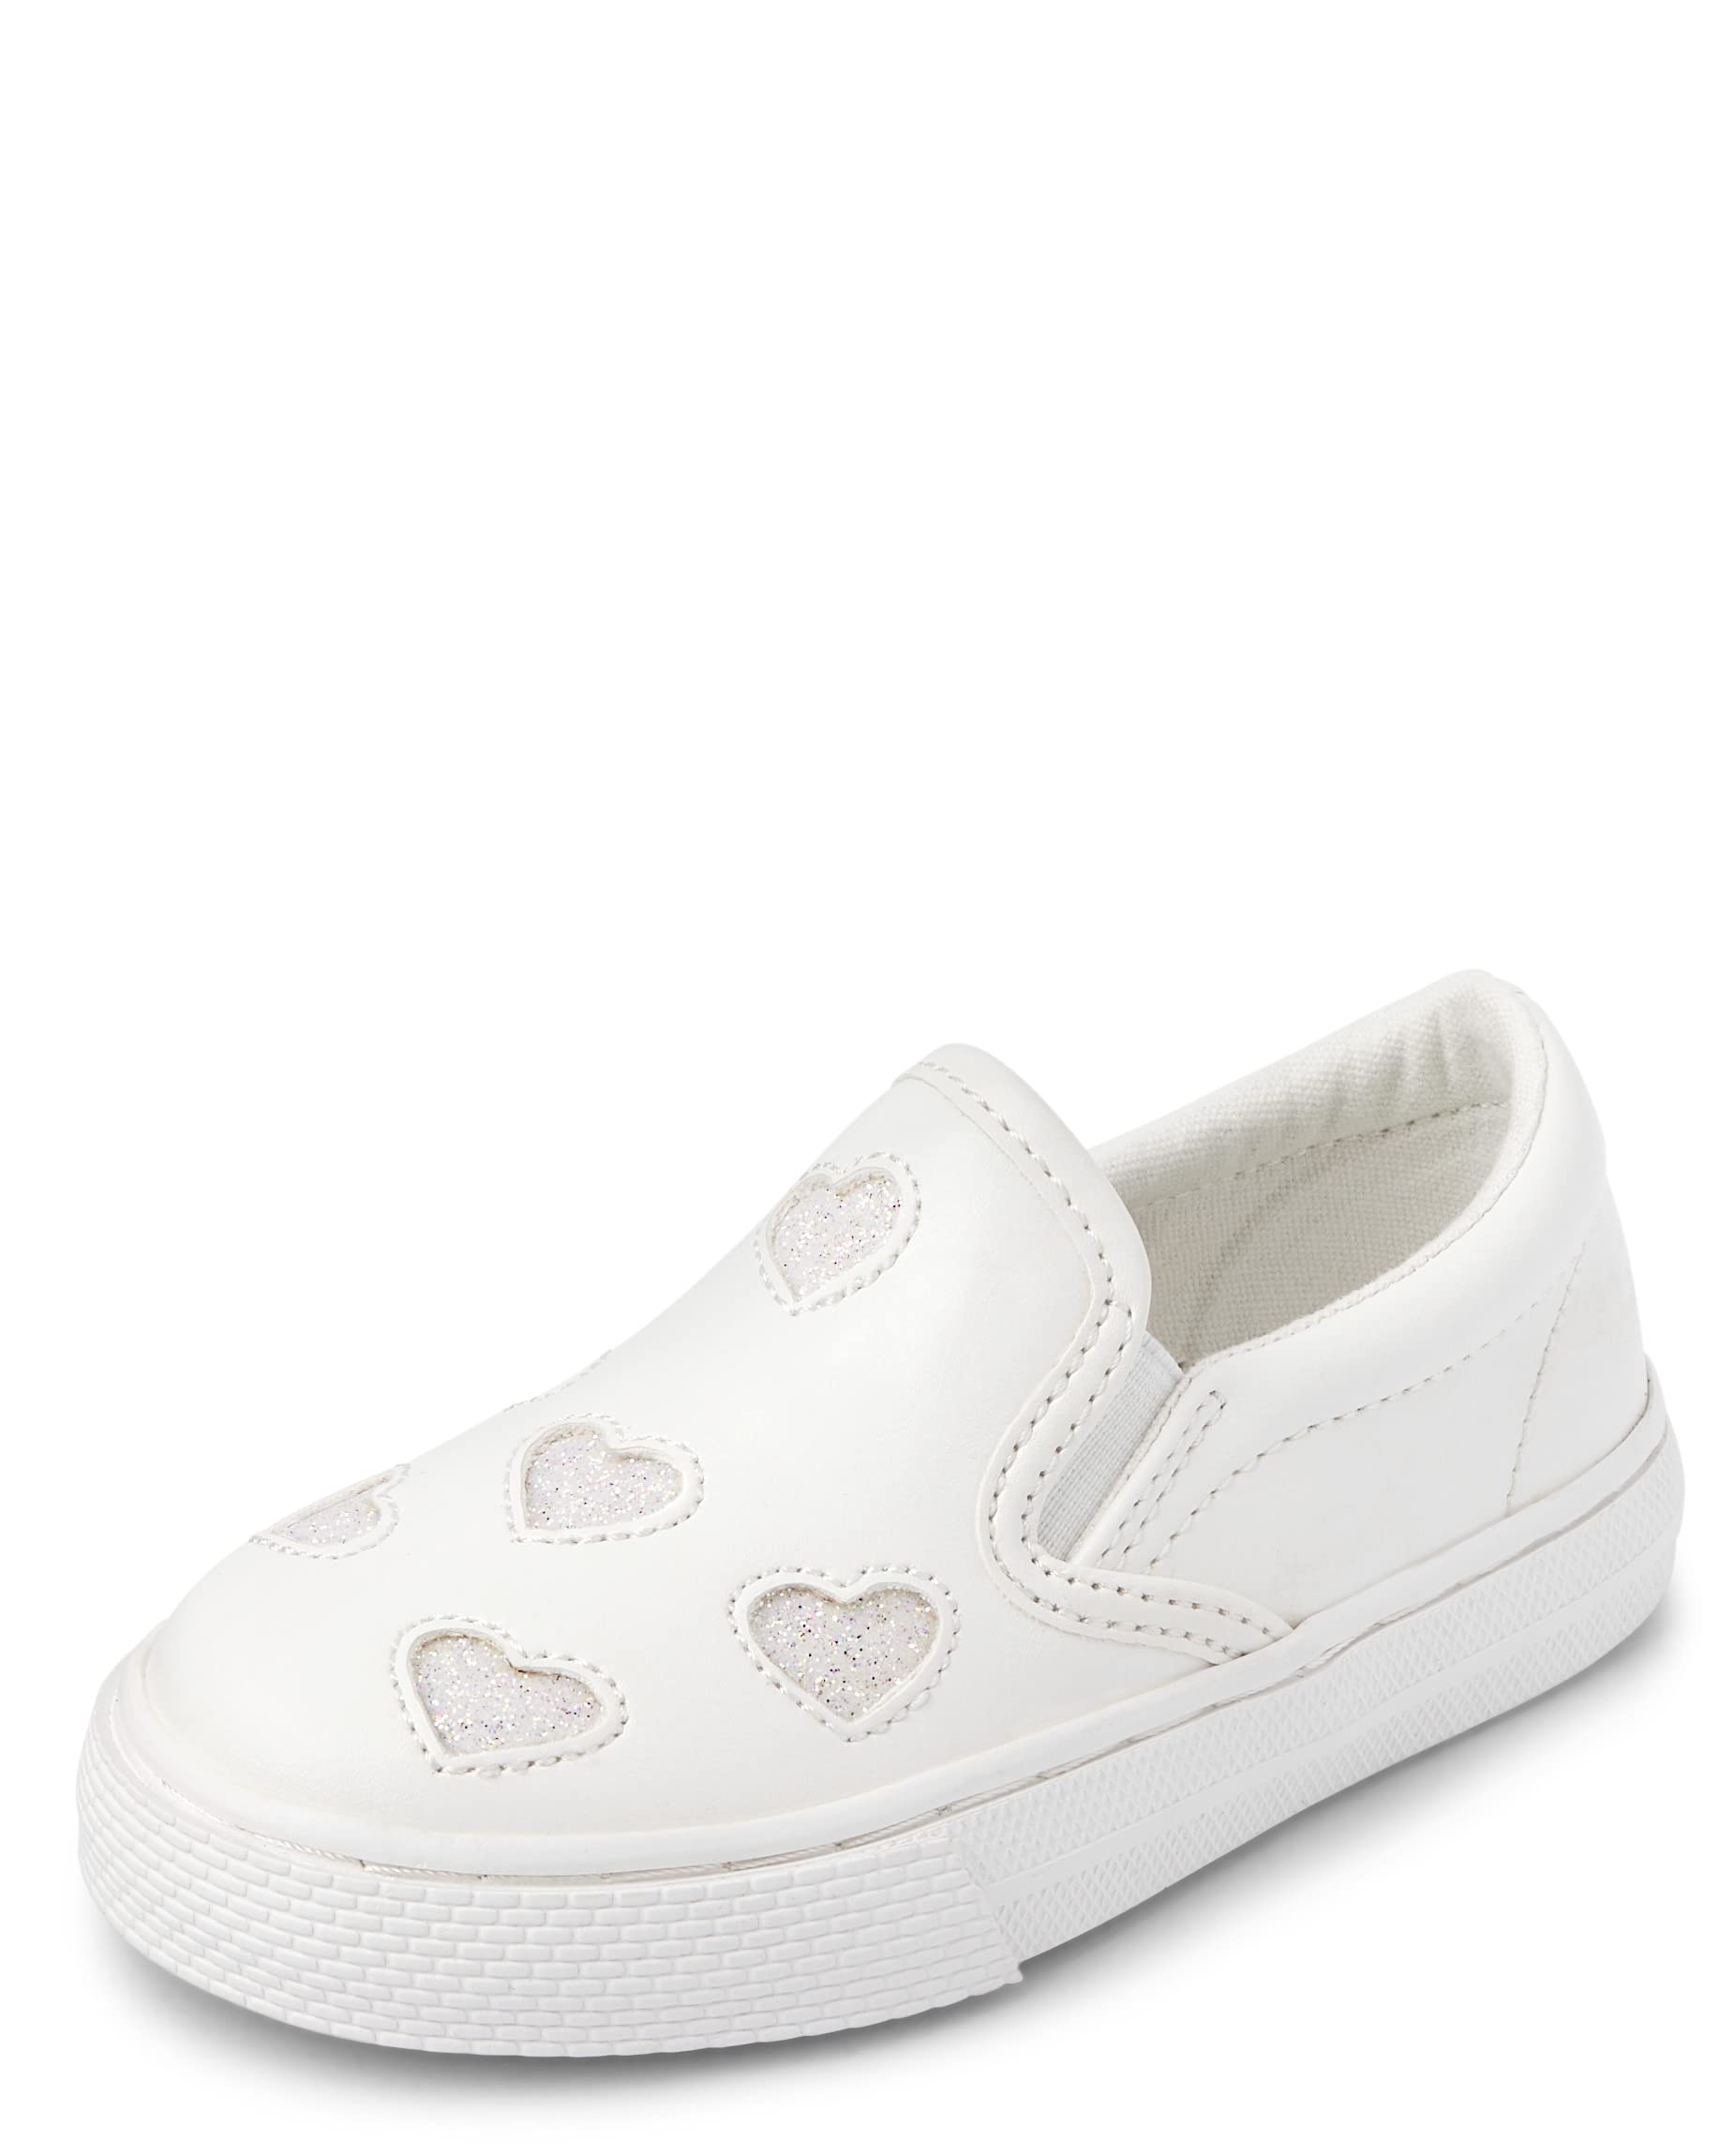 The Children's Place Girl's and Toddler Casual Slip on Shoes Sneaker